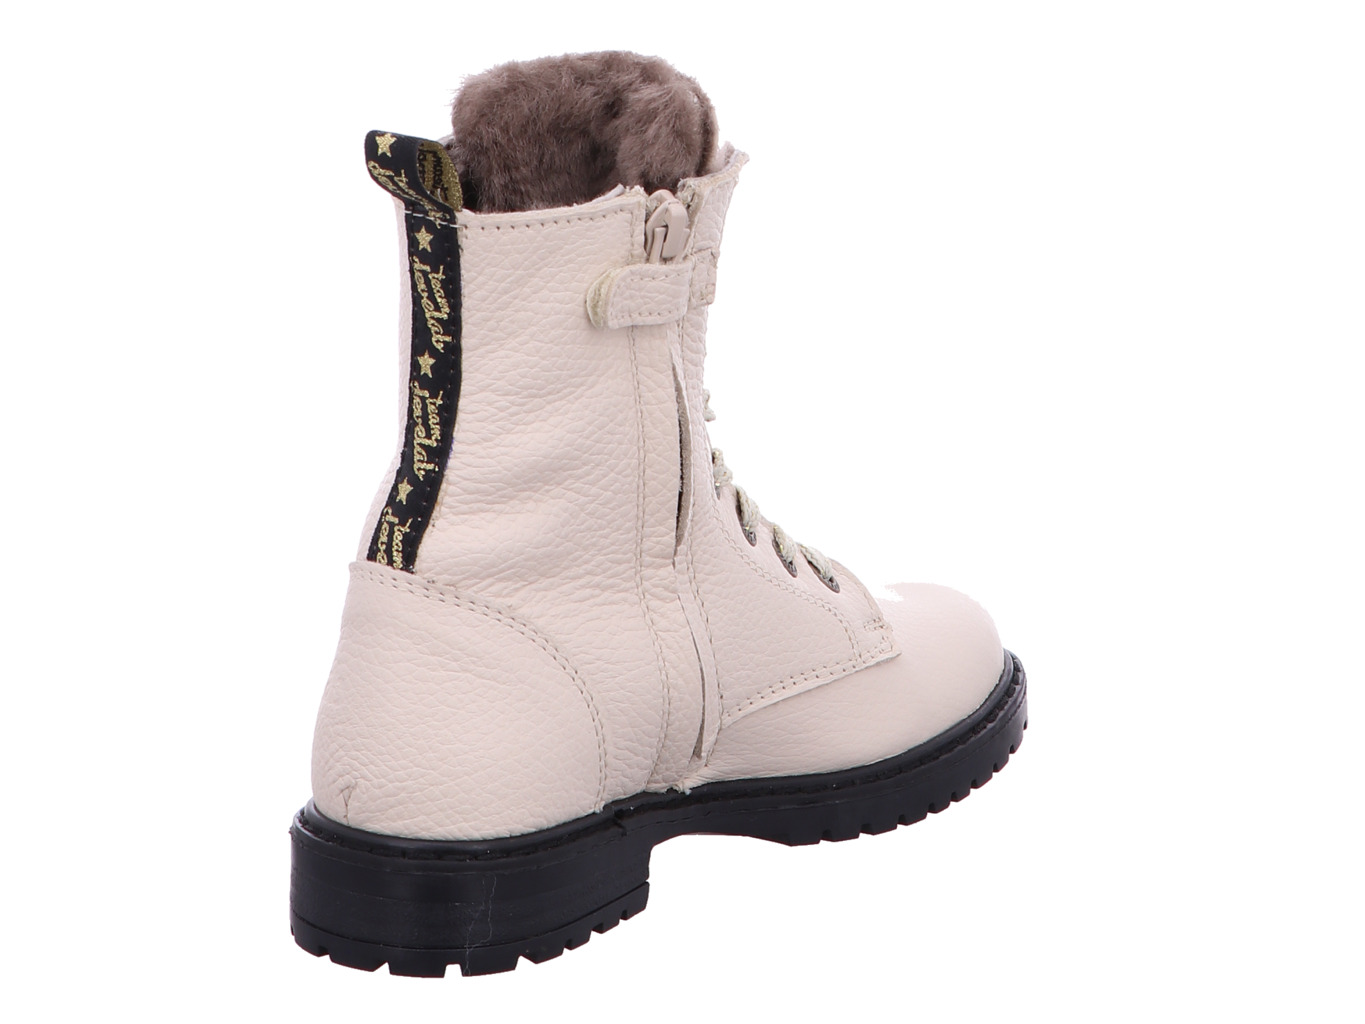 develab_girls_mid_boot_laces_42846_222_2147